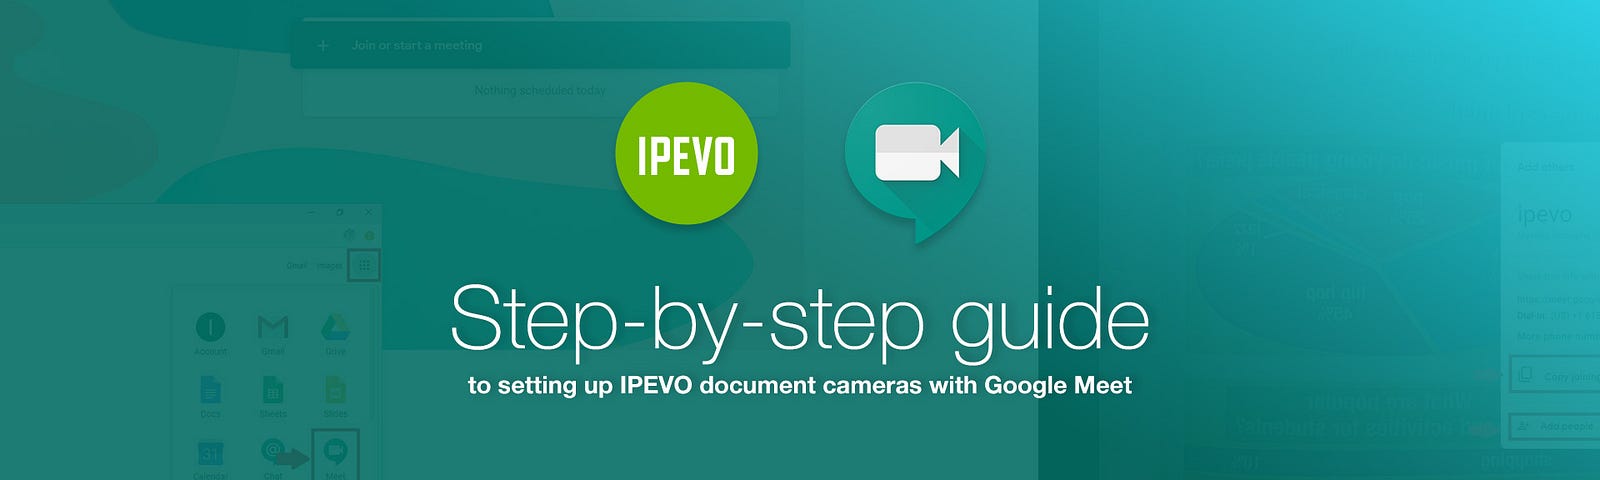 Step-by-step guide to setting up IPEVO document cameras with Google Meet